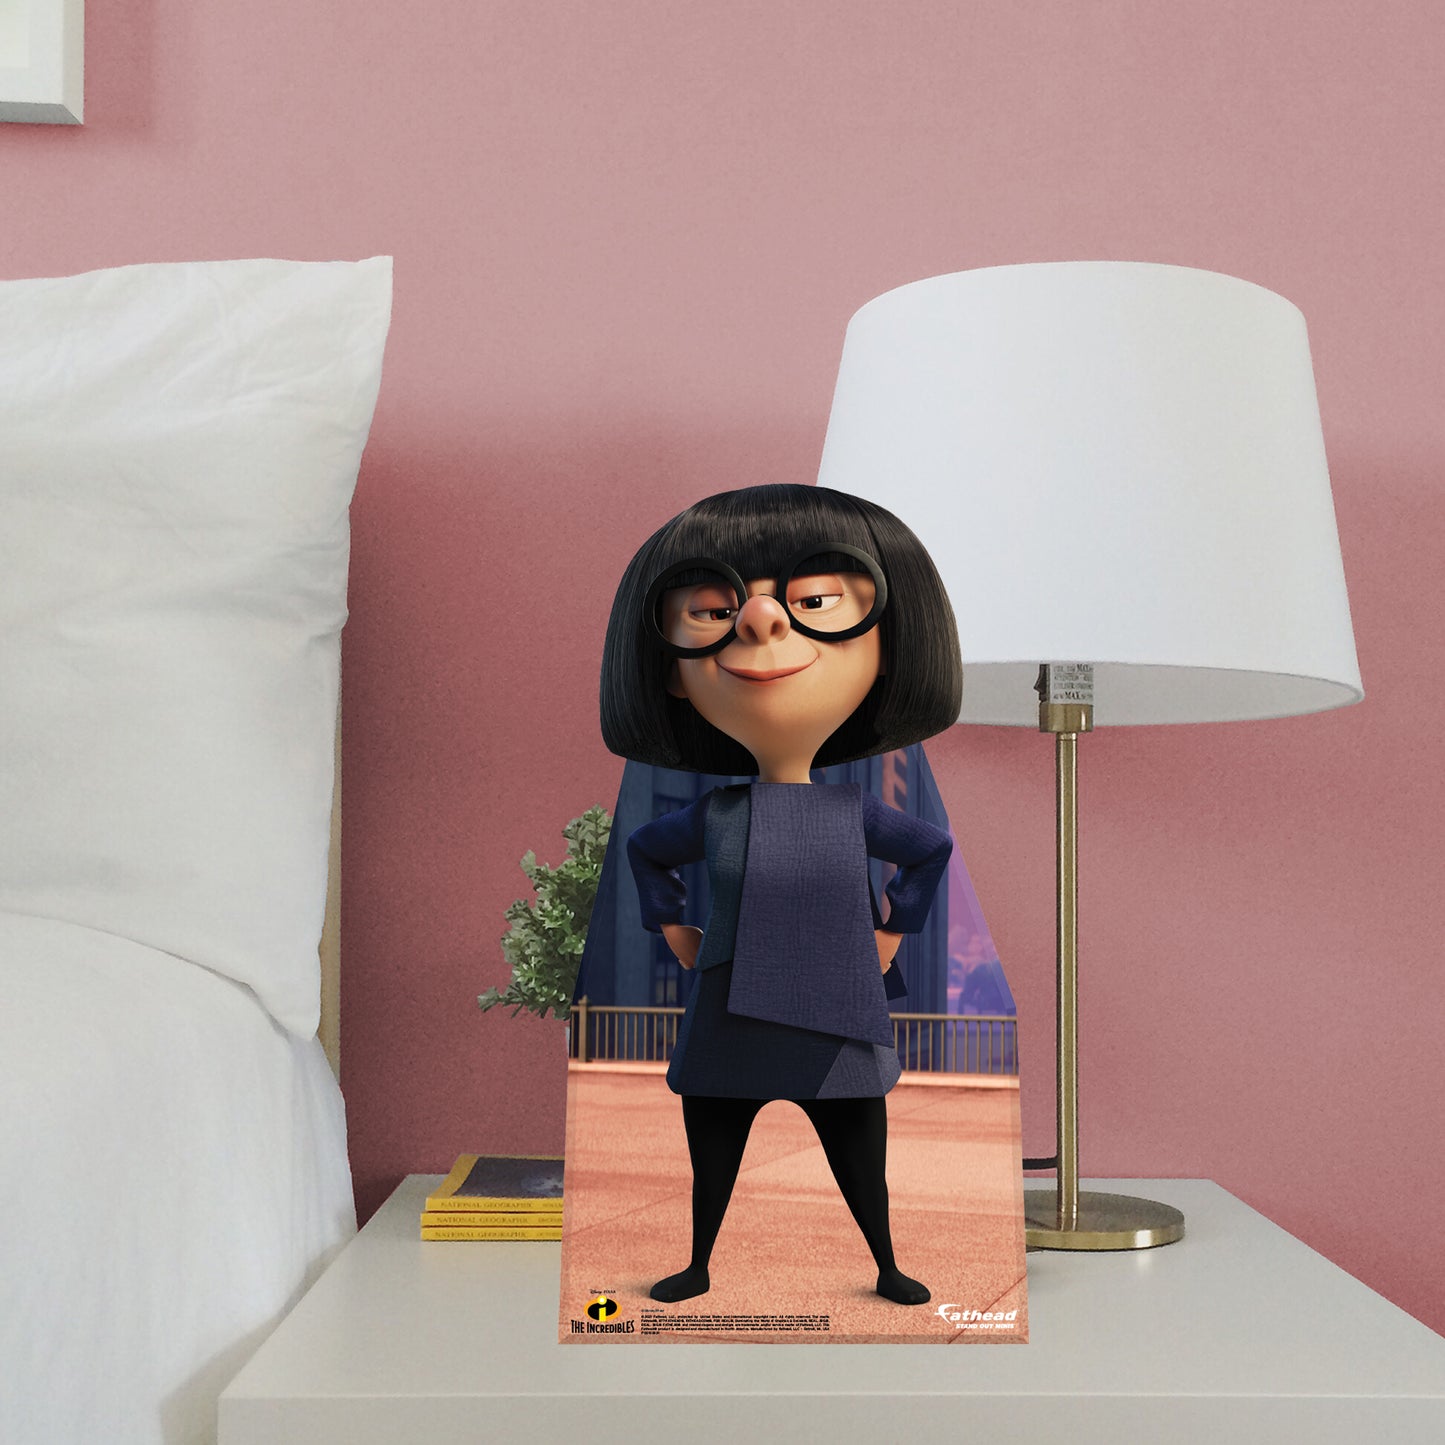 Incredibles: Edna Mini   Cardstock Cutout  - Officially Licensed Disney    Stand Out